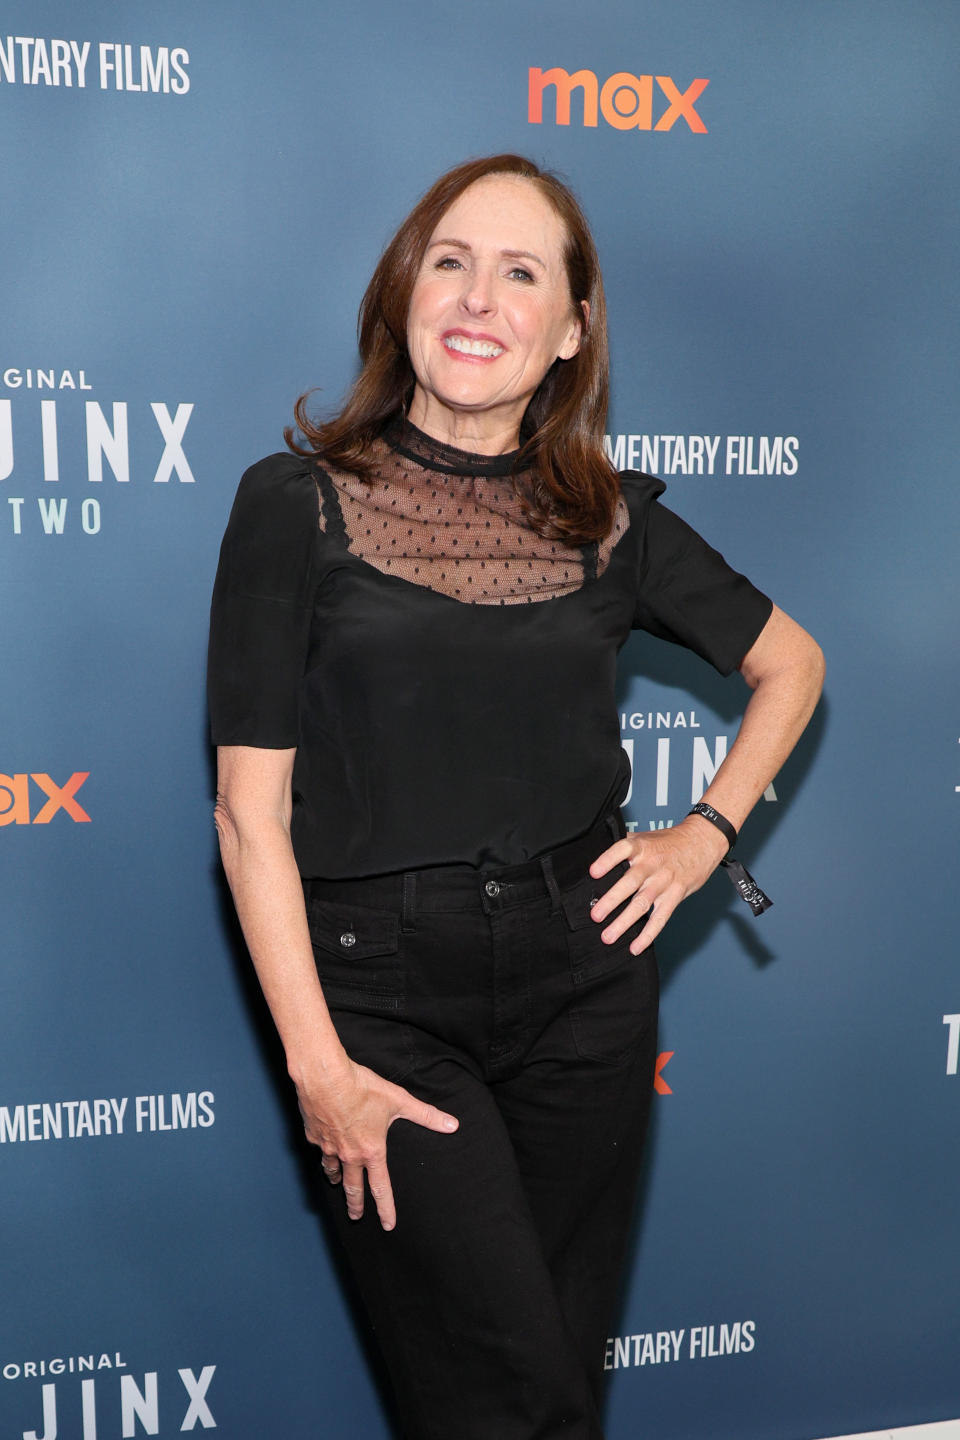 Molly Shannon posing on the red carpet, wearing a sheer black top and black pants, at an event for Max Original's documentary films